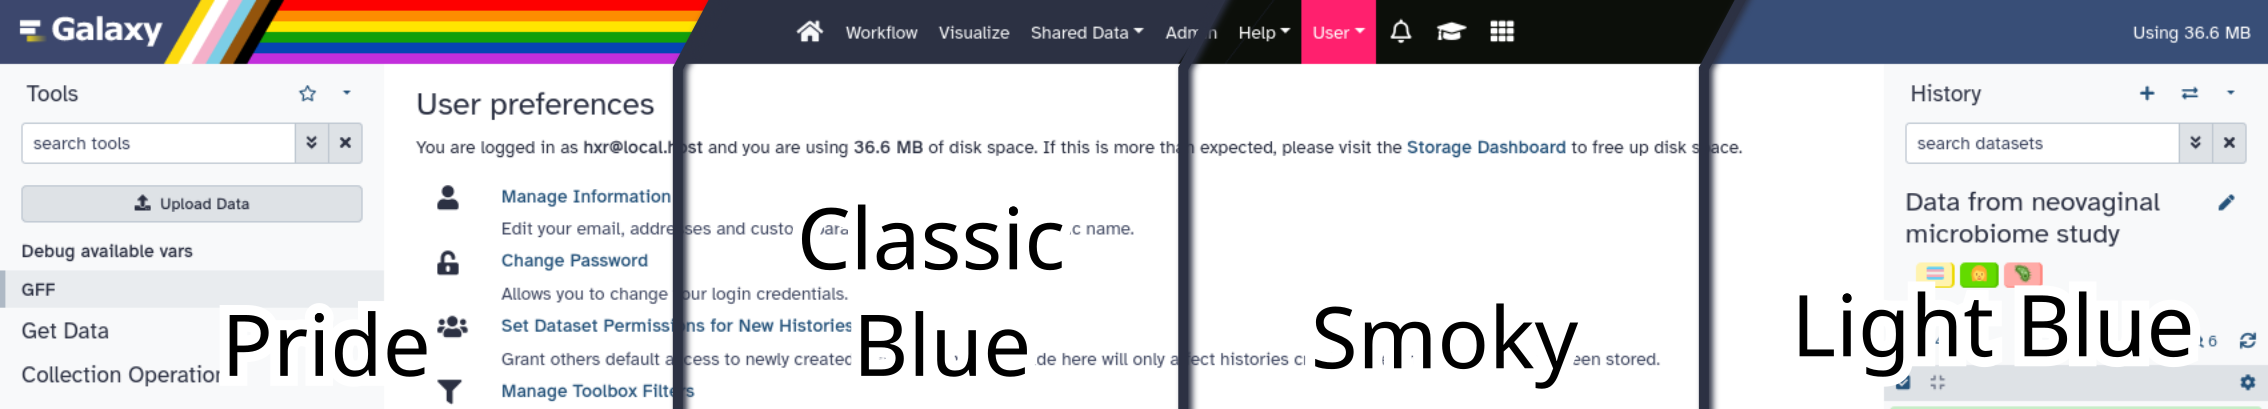 The top bar of Galaxy is shown across four different themes in a single image, diagonal cuts joining the images so it looks like a continuous Galaxy screenshot. The four themes shown are the progress pride flag in the masthead, the classic Galaxy dark blue, a black theme with pink highlights, and then a lighter blue theme.